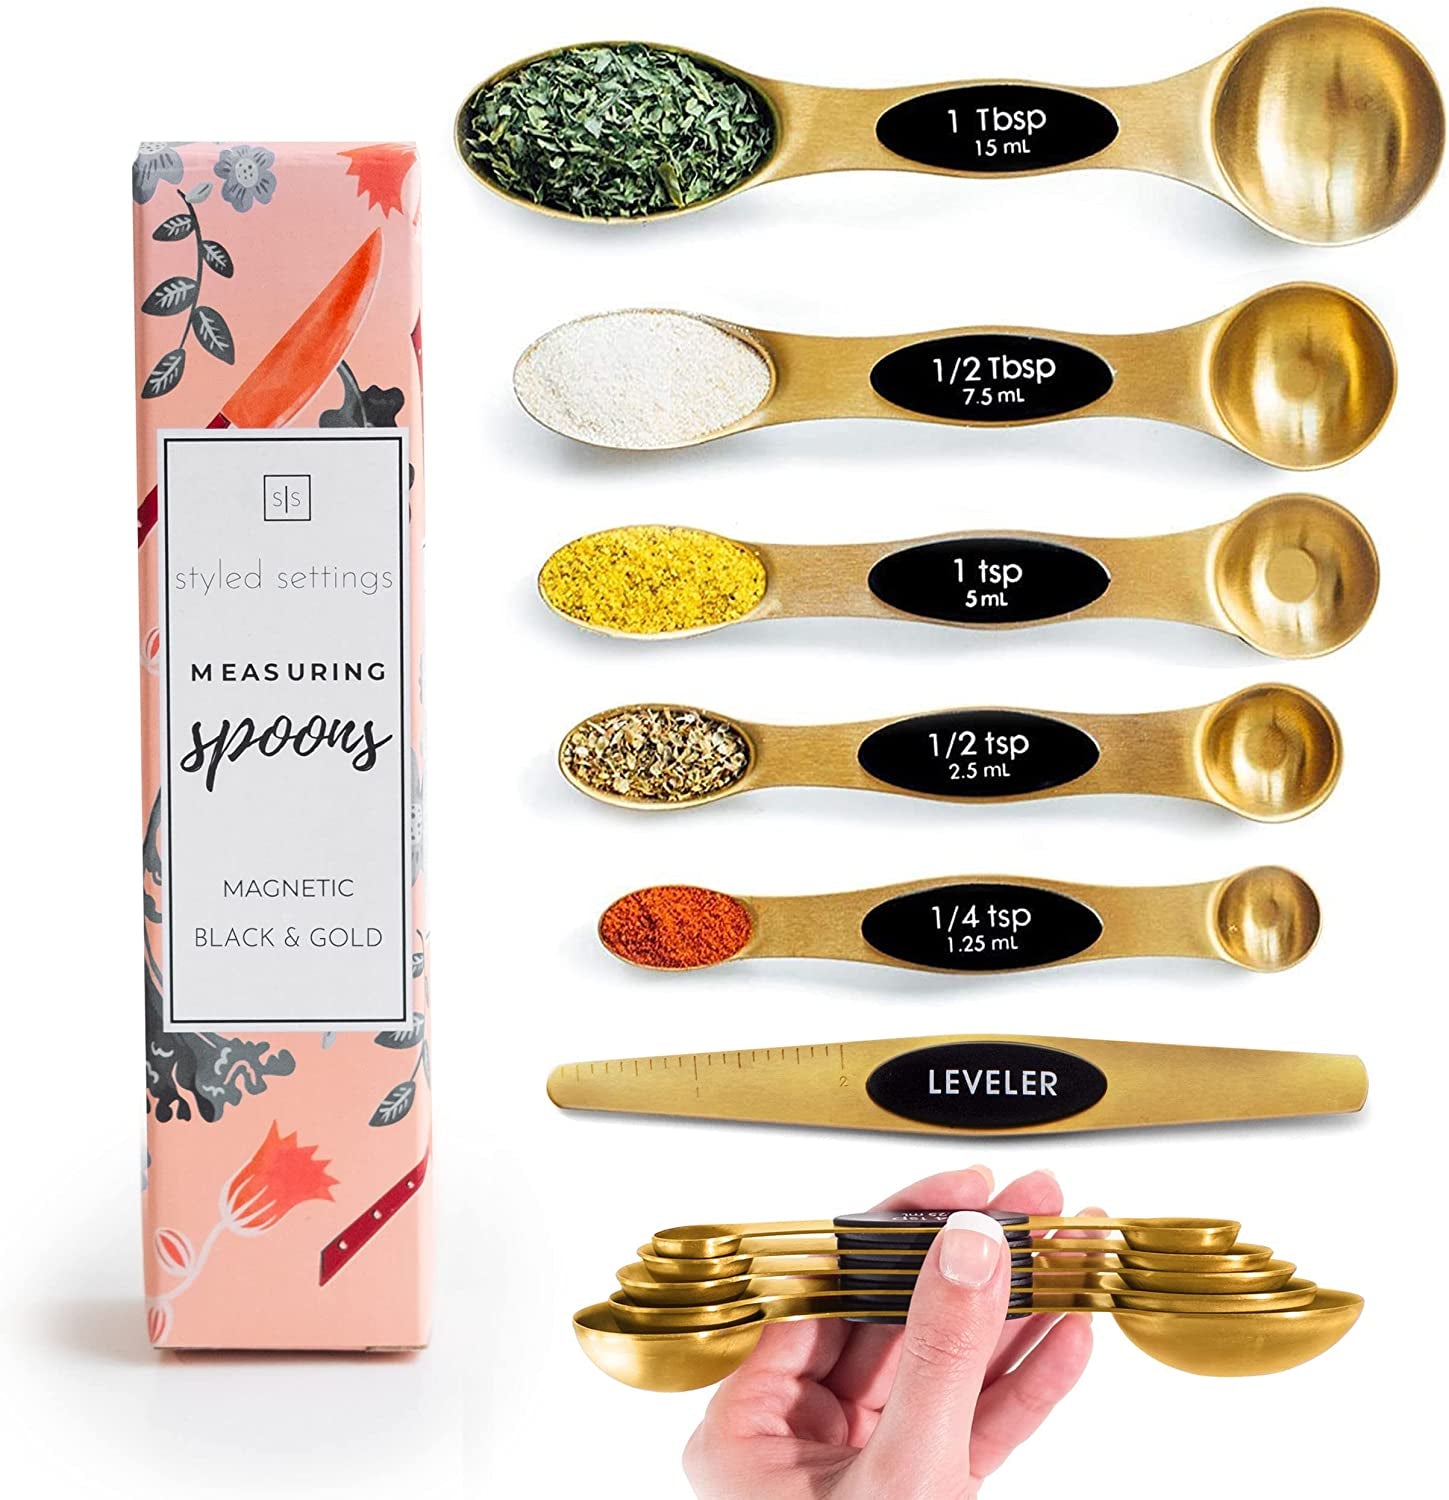 Magnetic Measuring Spoons Set - Stainless Steel Measuring Spoons - Magnetic Measuring Spoon Set, Gold Measuring Spoons Magnetic, Cute Measuring Spoons for Cooking & Baking - Metal Measuring Spoons